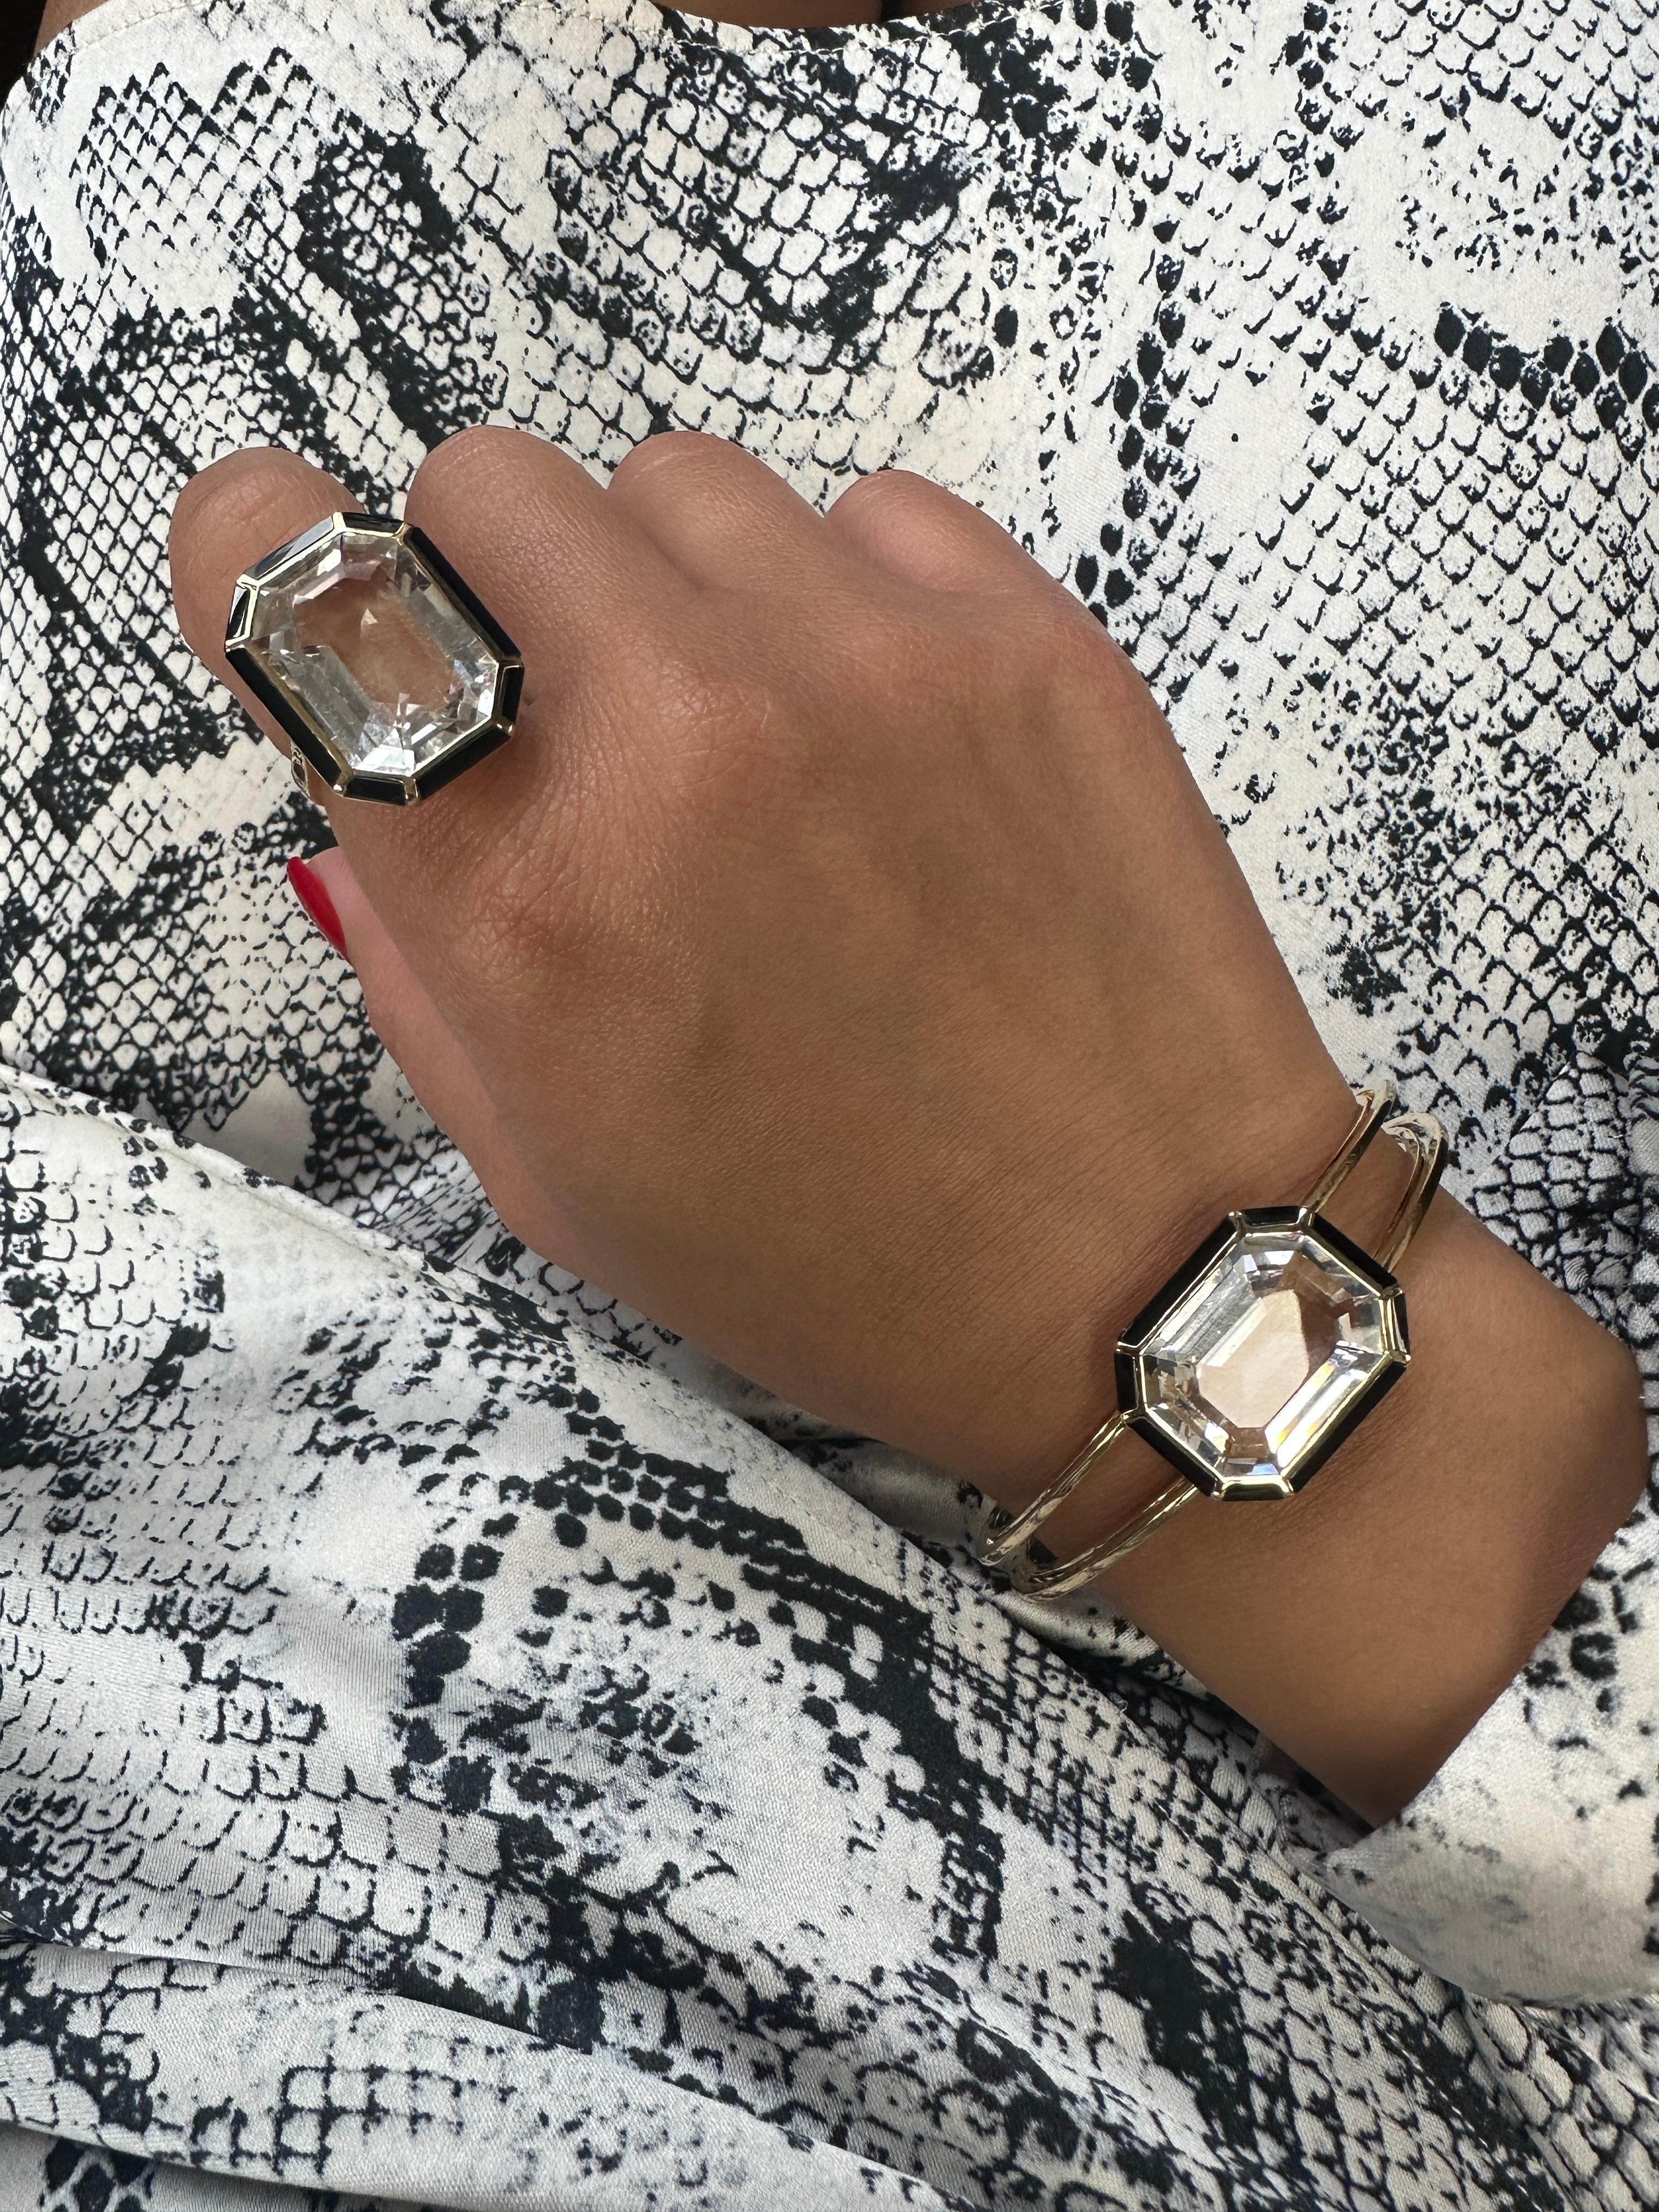 The Rock Crystal Onyx Emerald Cut Cuff from the 'Mélange' Collection is a stunning piece of jewelry in 18K yellow gold. It features an exquisite emerald-cut rock crystal with and onyx border. This cuff blends contrasting elements to create a